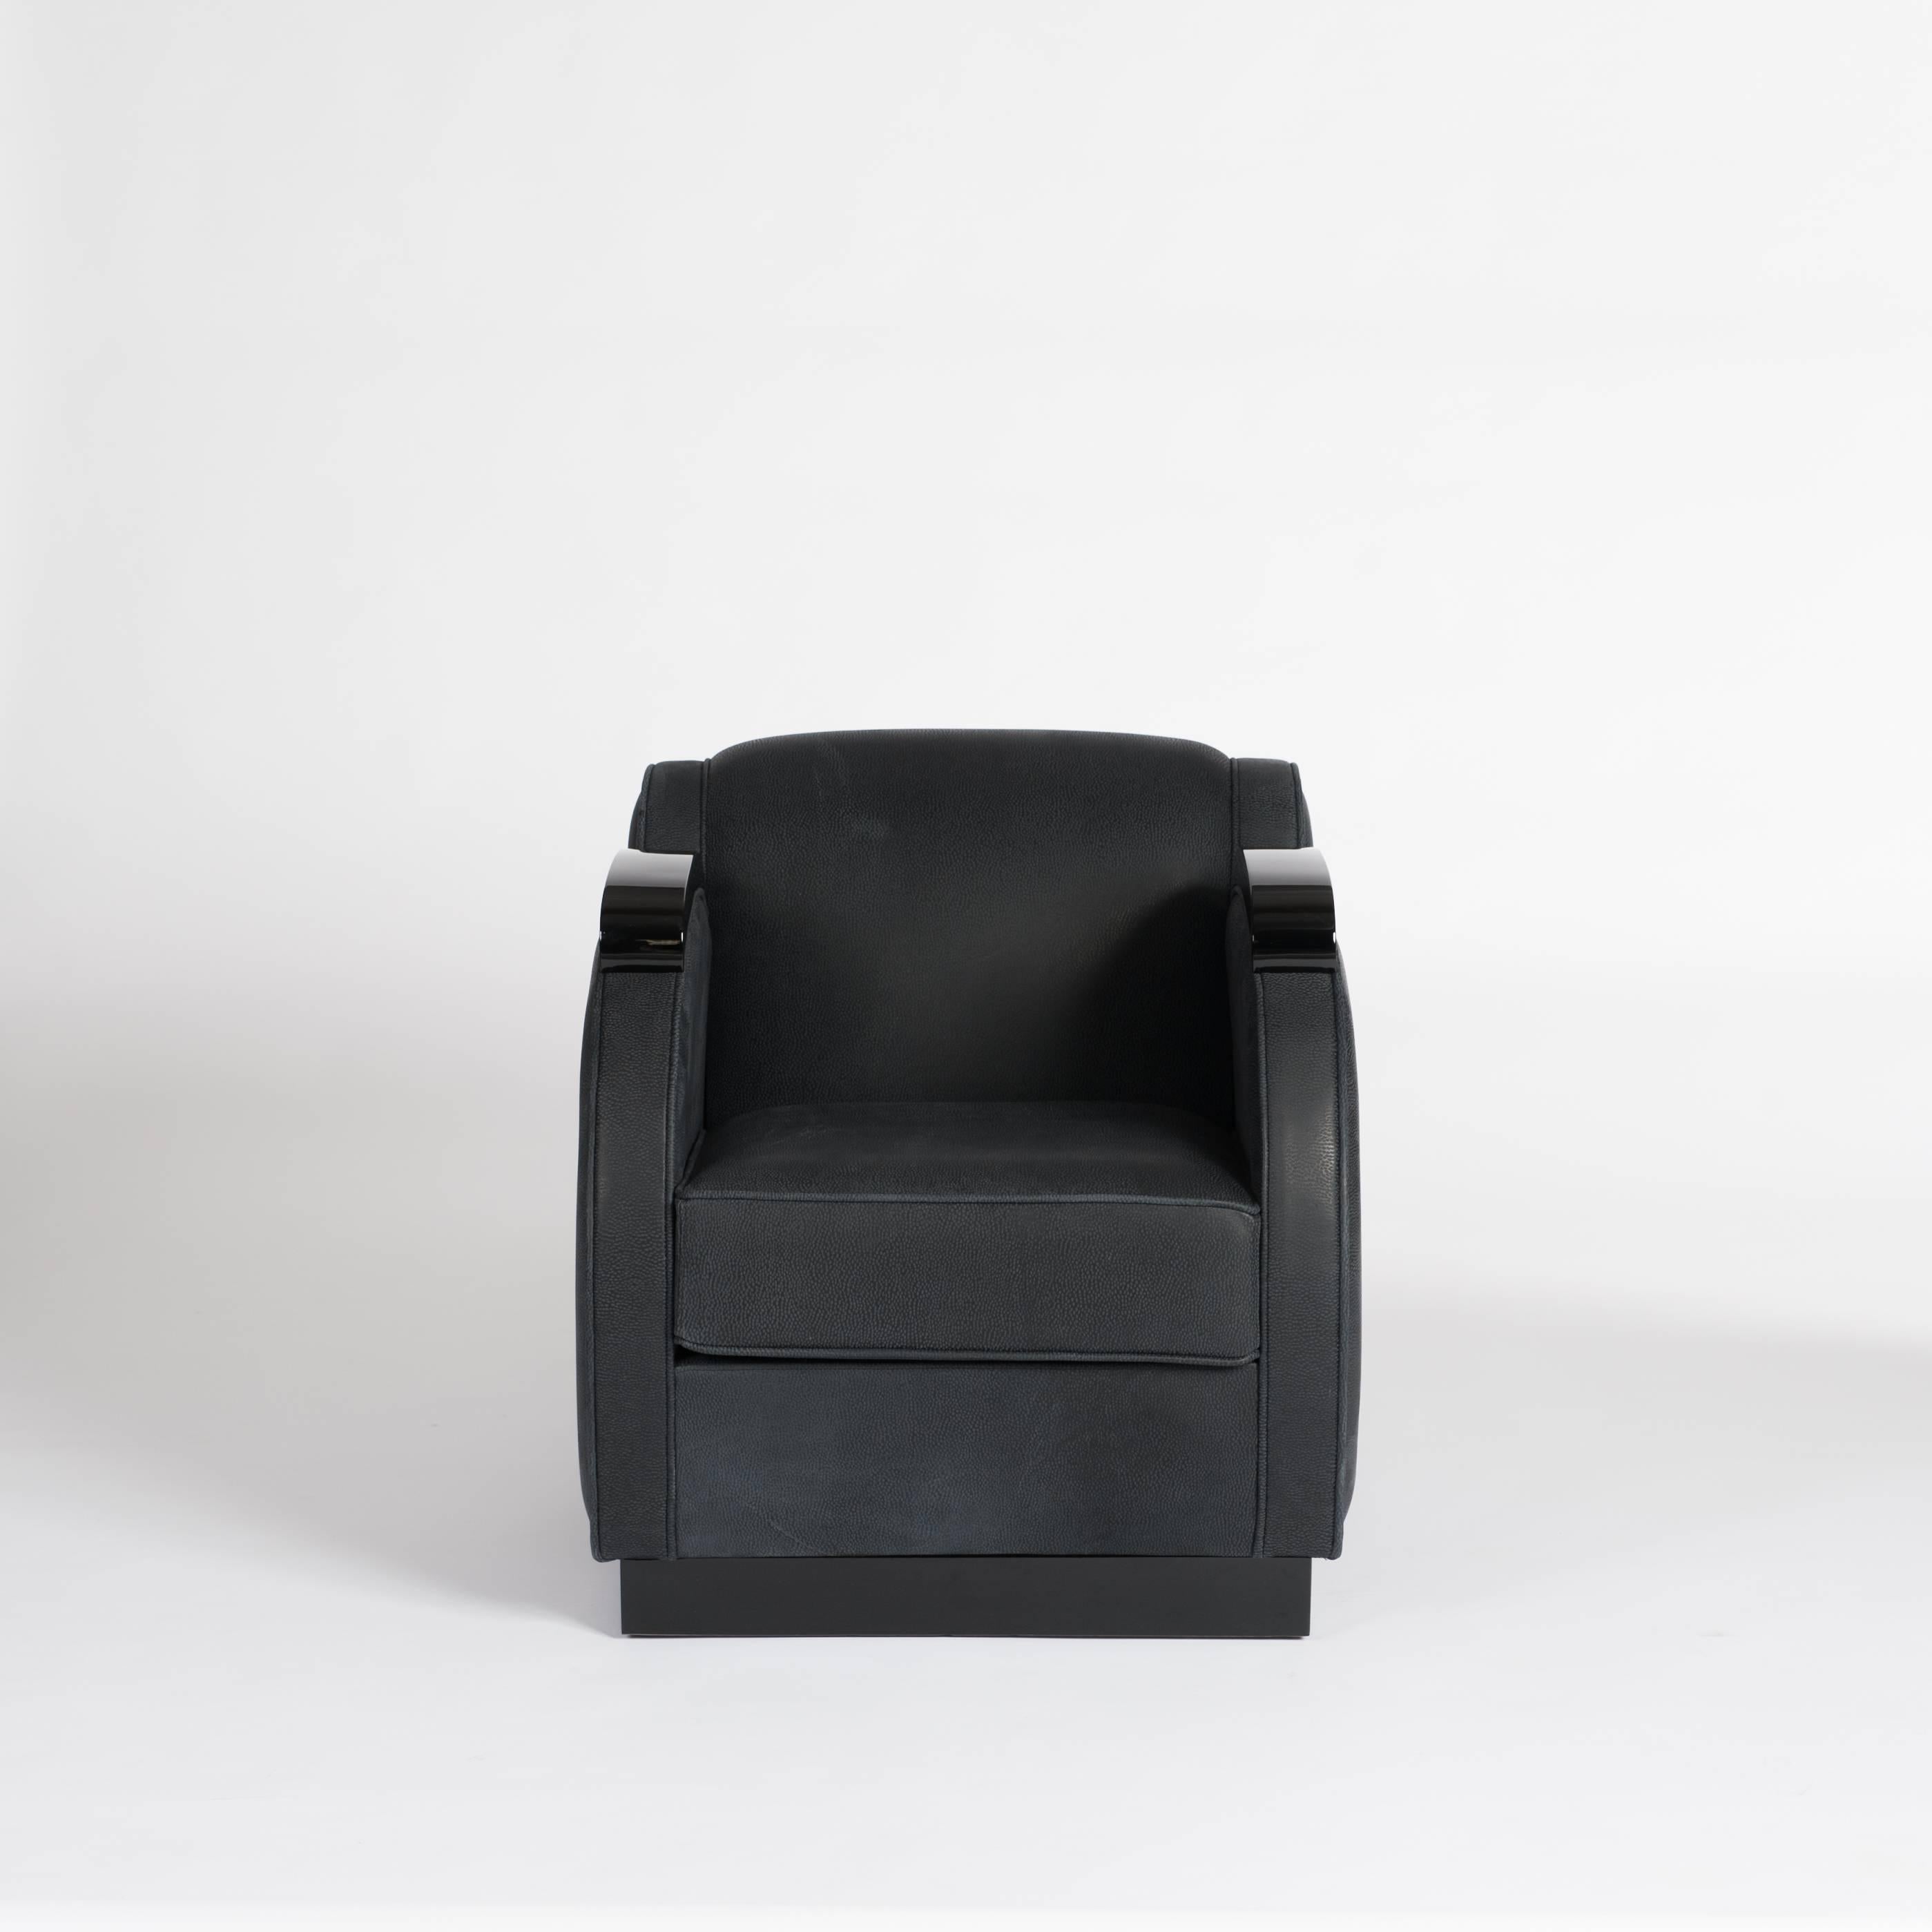 Unique Art Deco club chair with curved arms and sides.
The wooden frame is completely re-lacquered in high gloss black finish
the upholstery is completely re-worked, the cover fabric is an anthracite nubuck leather with piping in perfect man-made